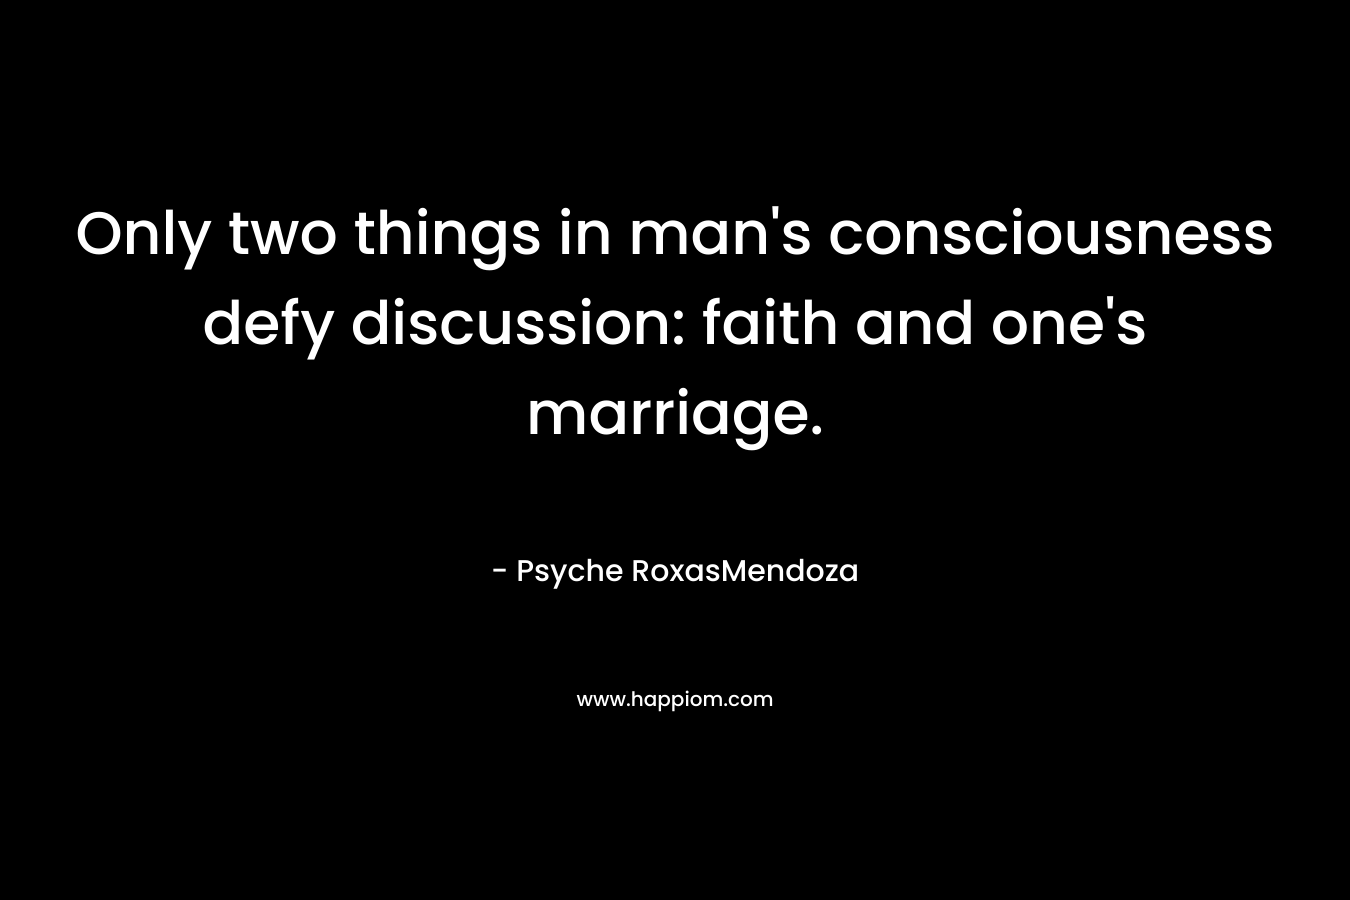 Only two things in man’s consciousness defy discussion: faith and one’s marriage. – Psyche RoxasMendoza